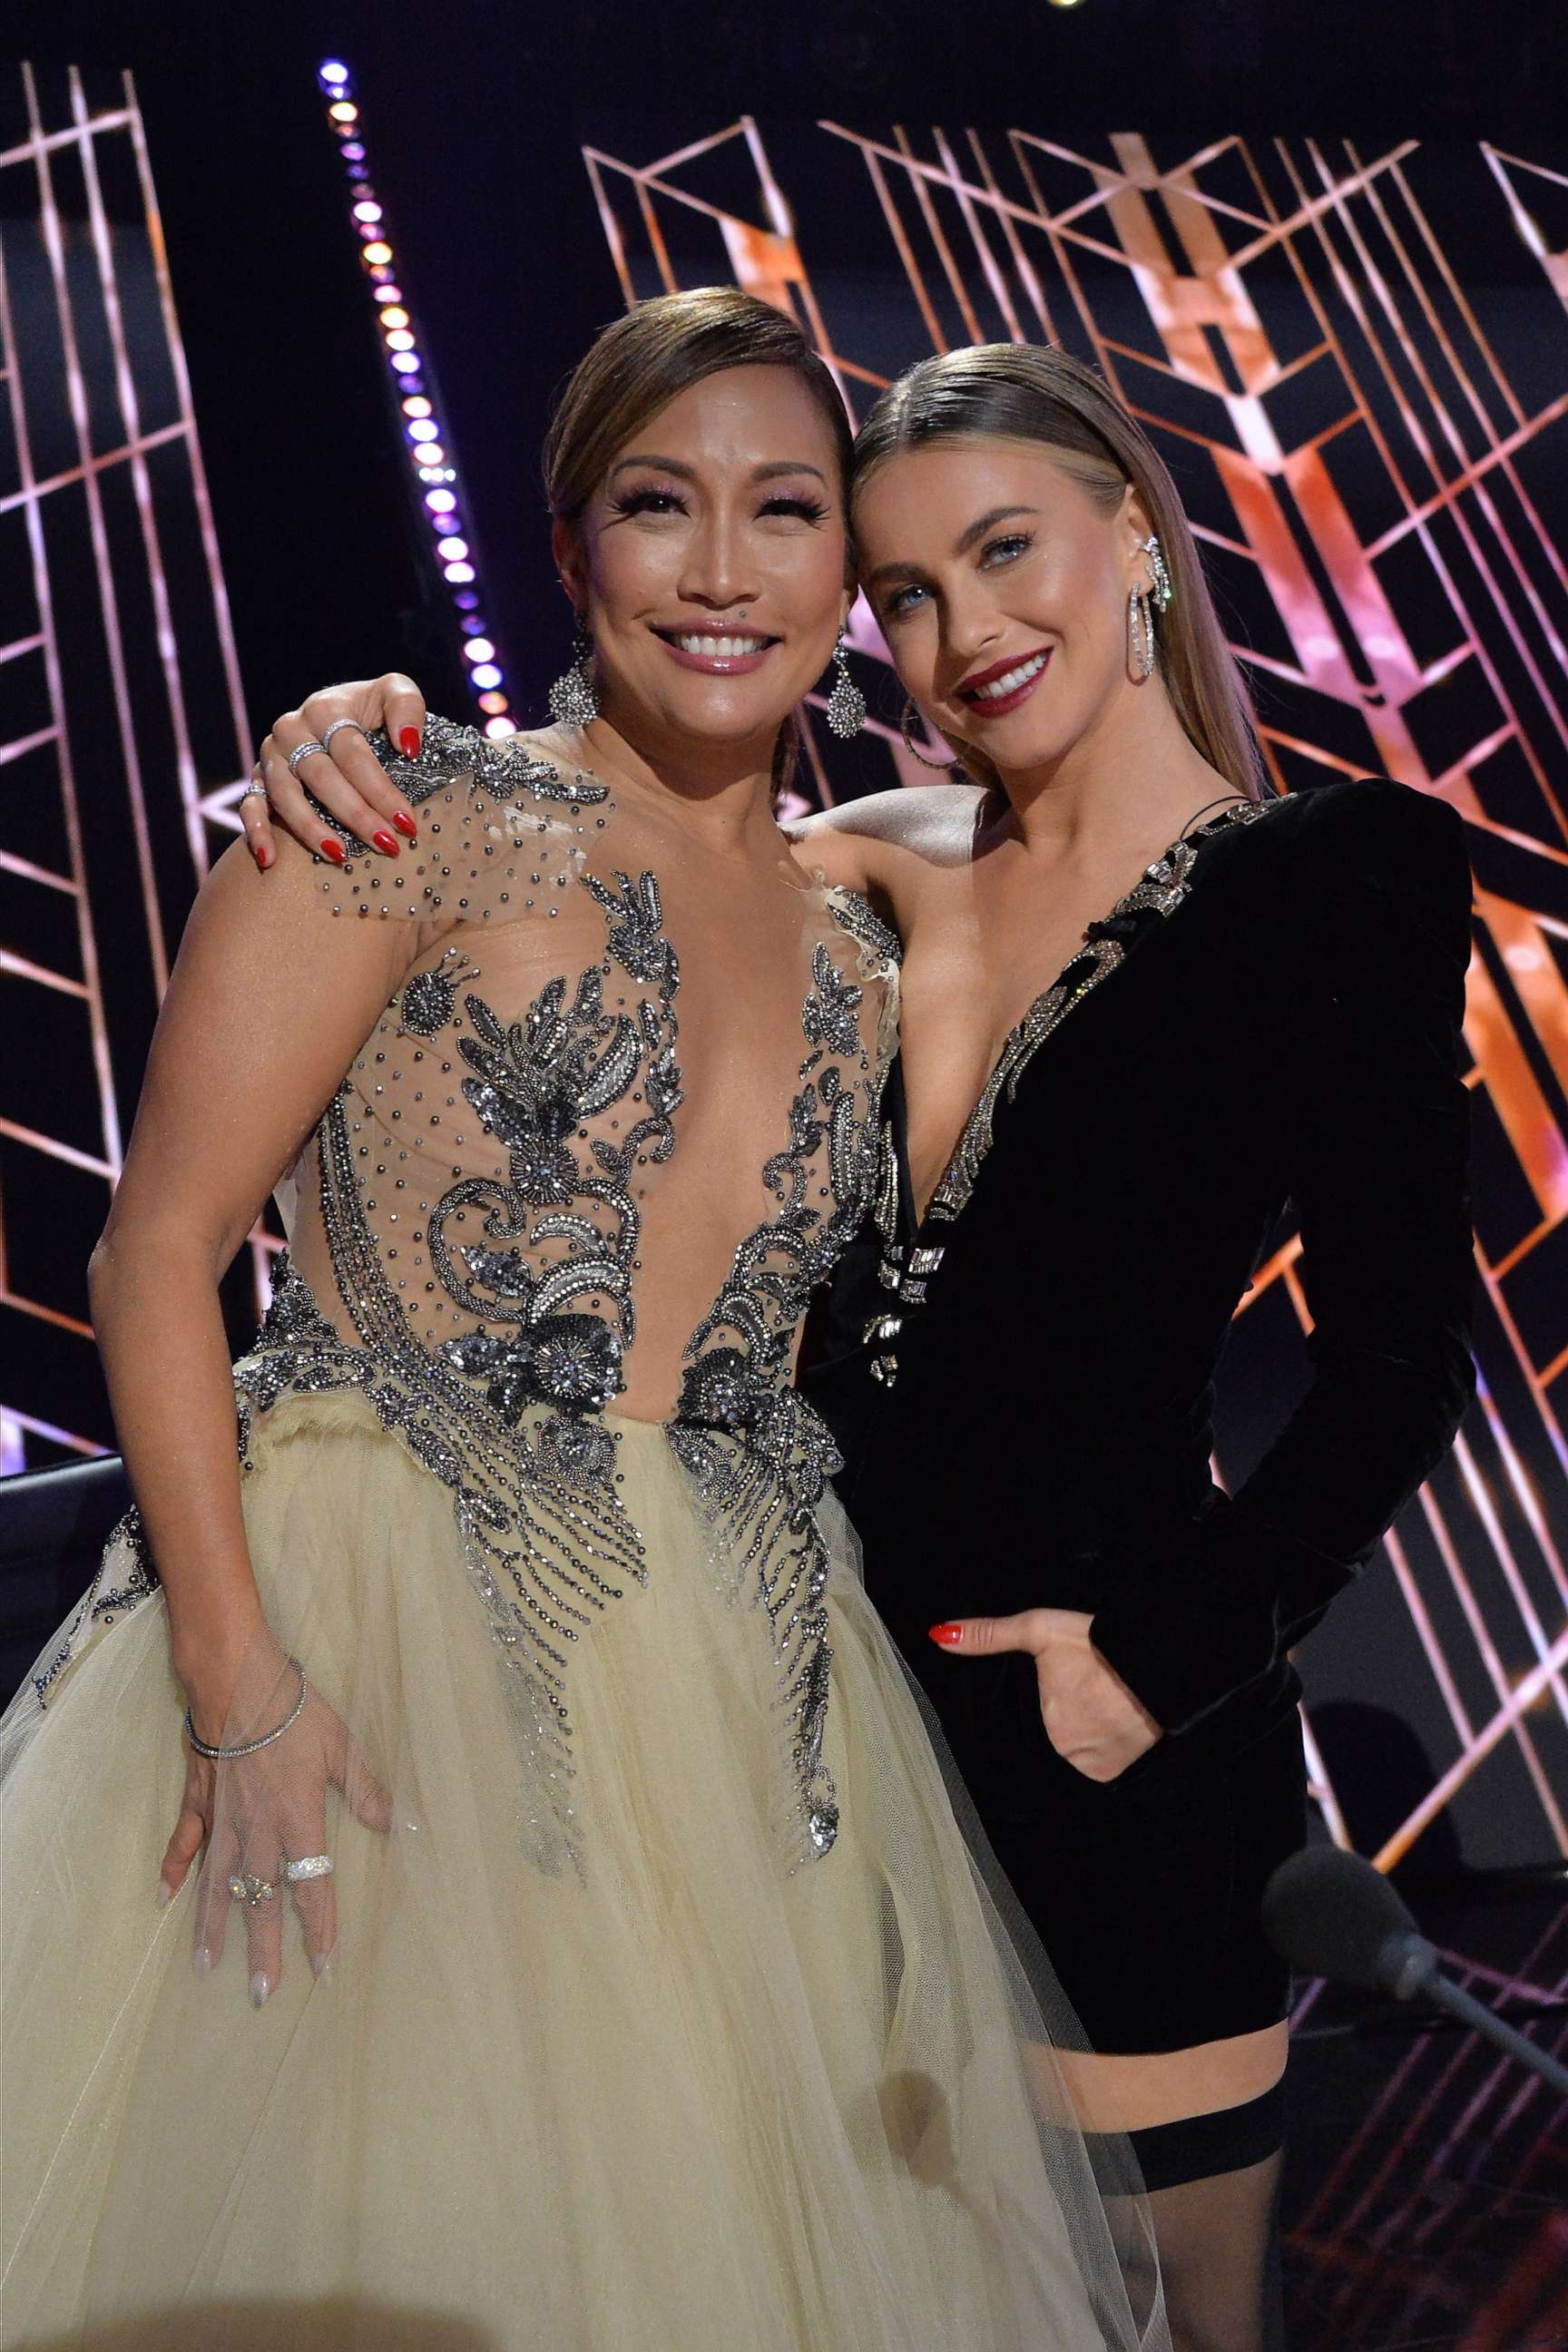 PHOTO: Carrie Ann Inaba and Julianne Hough during the season finale of Dancing with the Stars, Nov. 22, 2021.